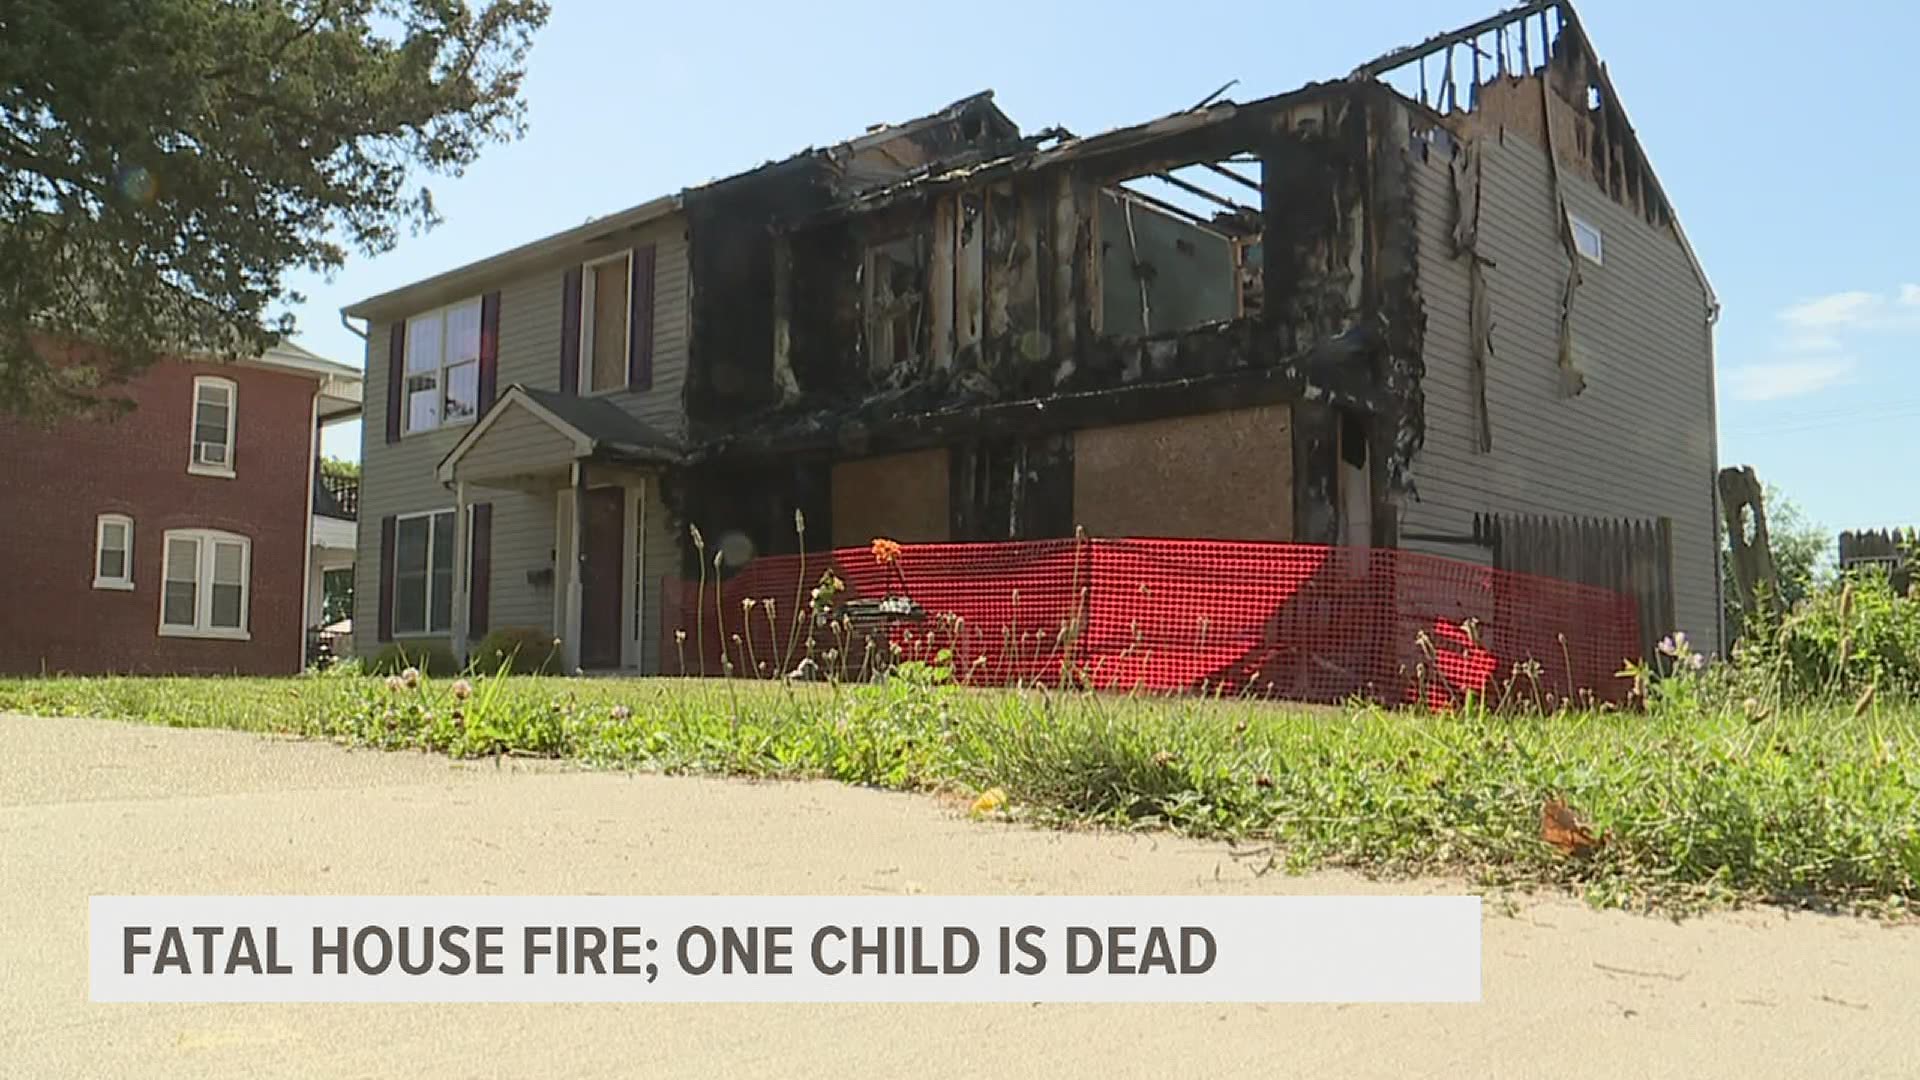 Two children suffered burns and were taken to a specialty burn center where one of them later succumbed to their injuries.